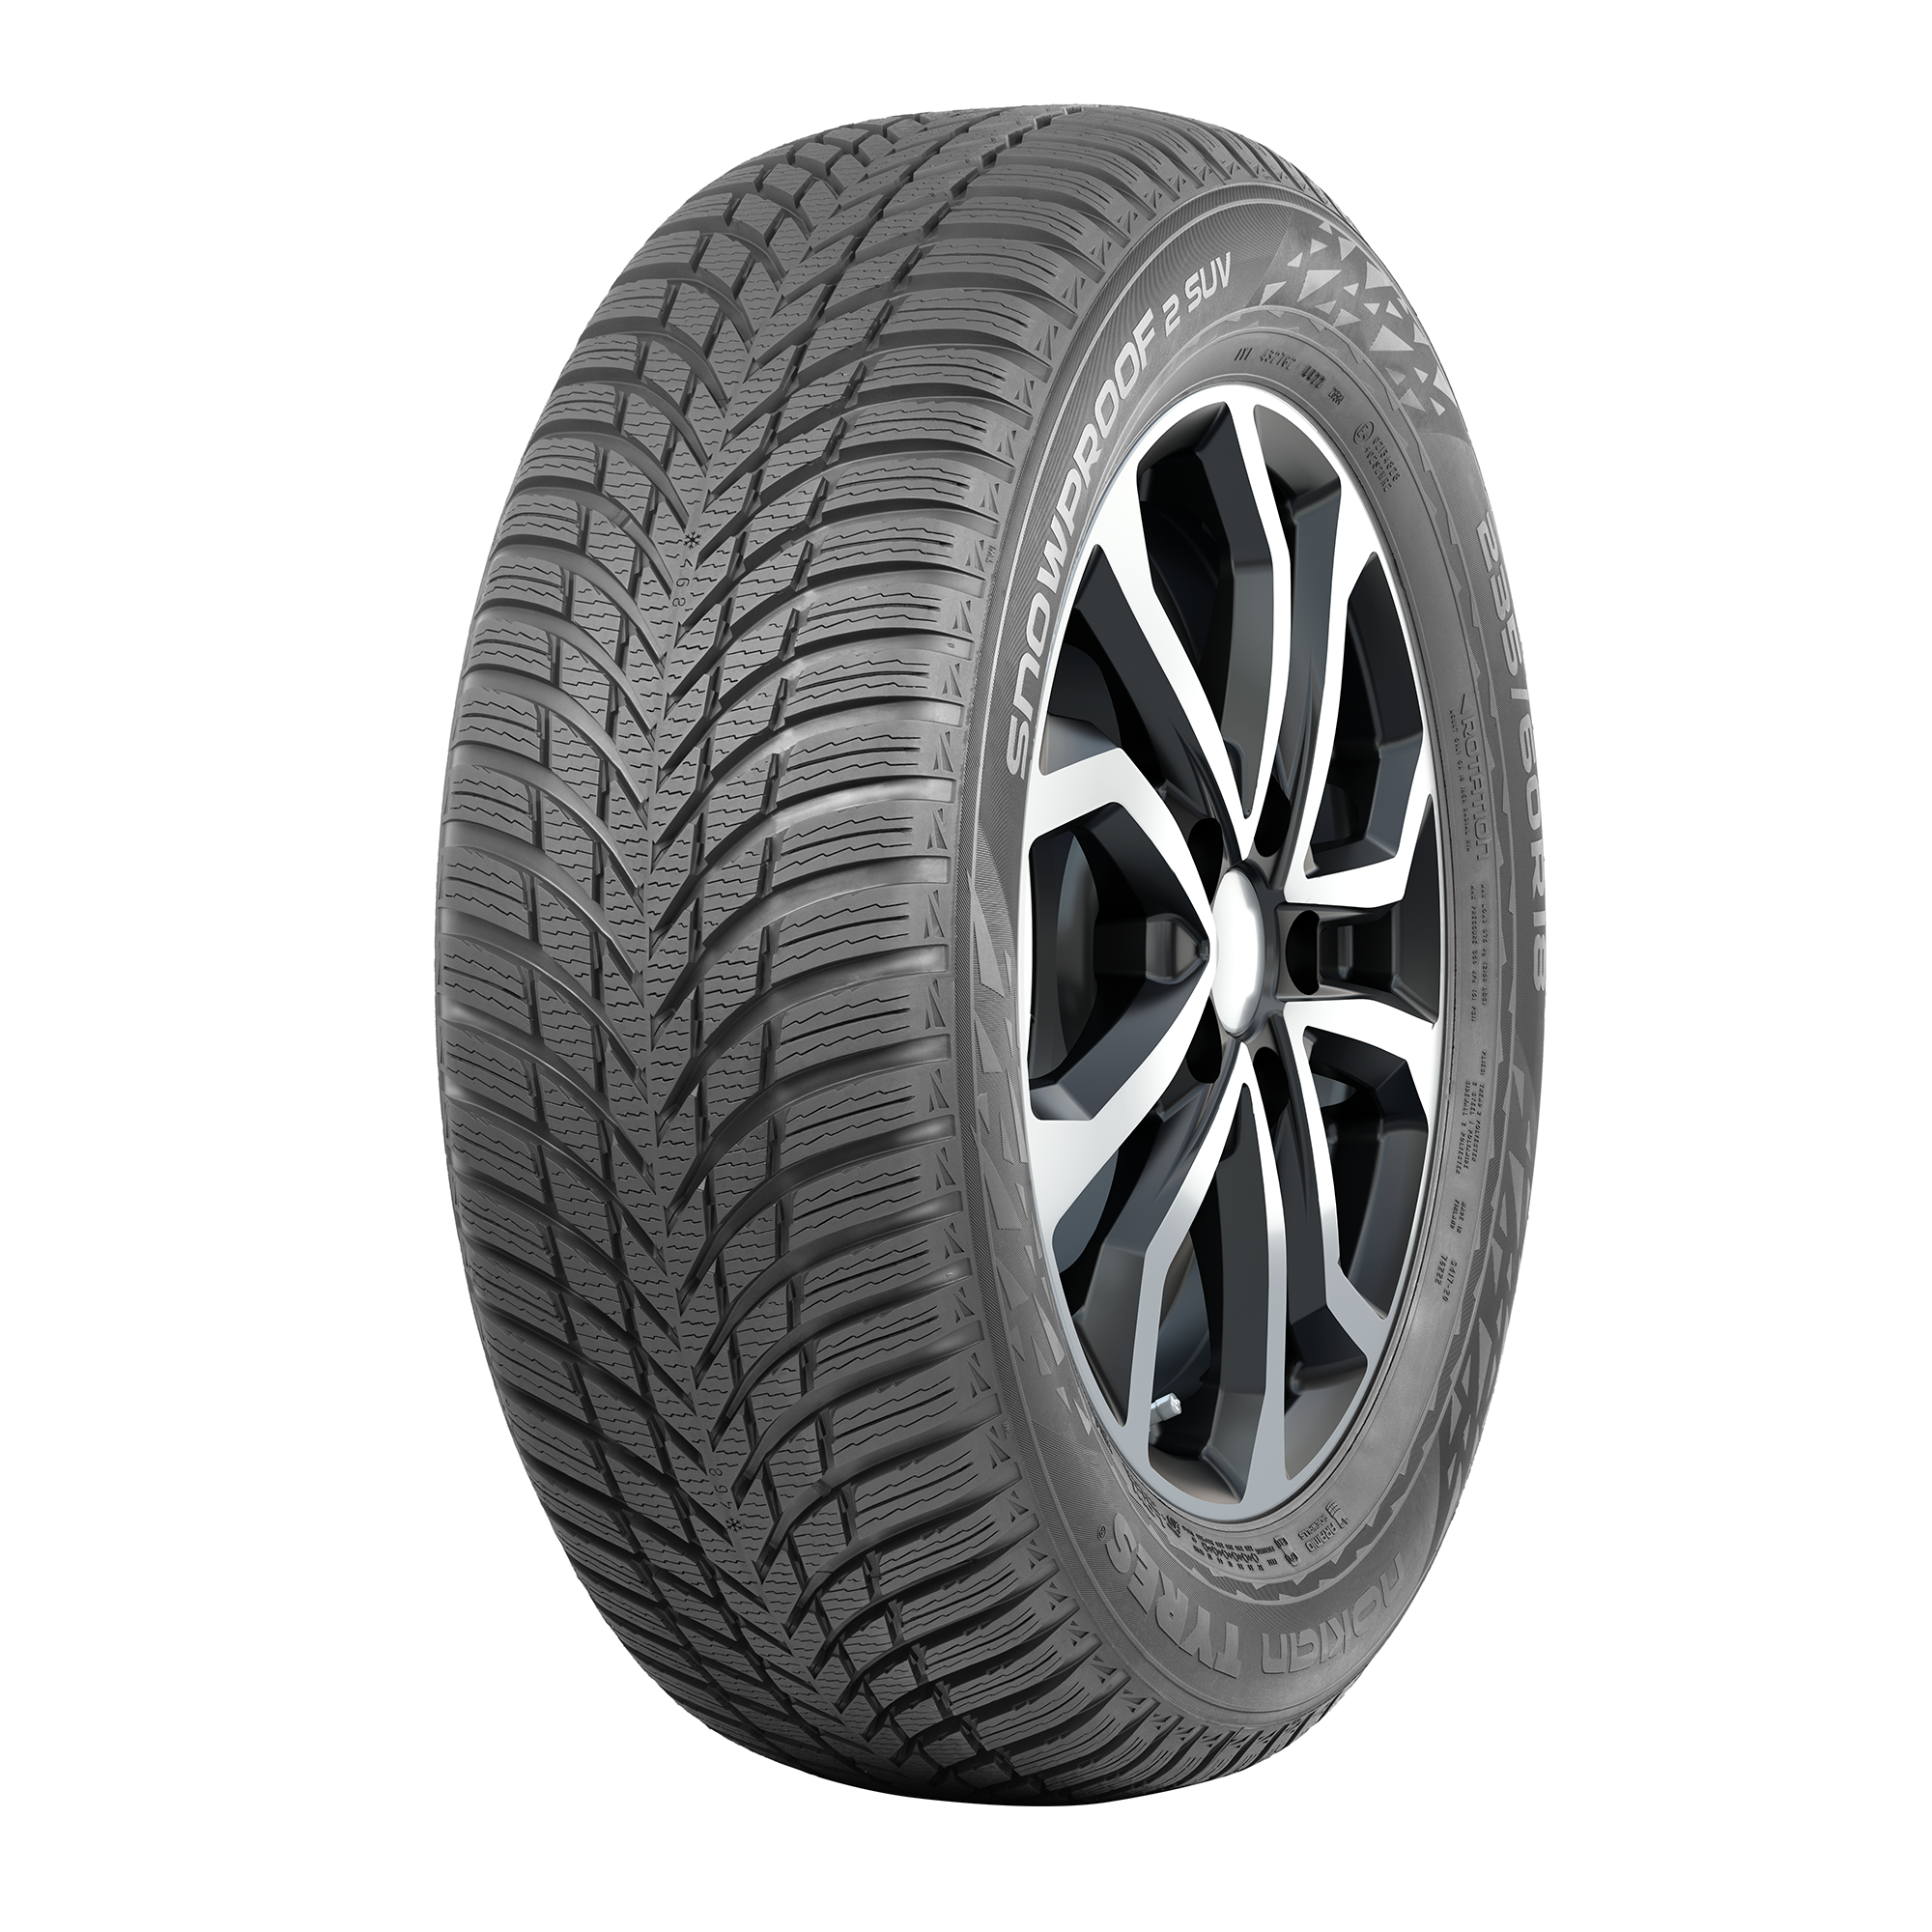 Nokian Tyres Snowproof 2 SUV XL 235/60 R18 107H